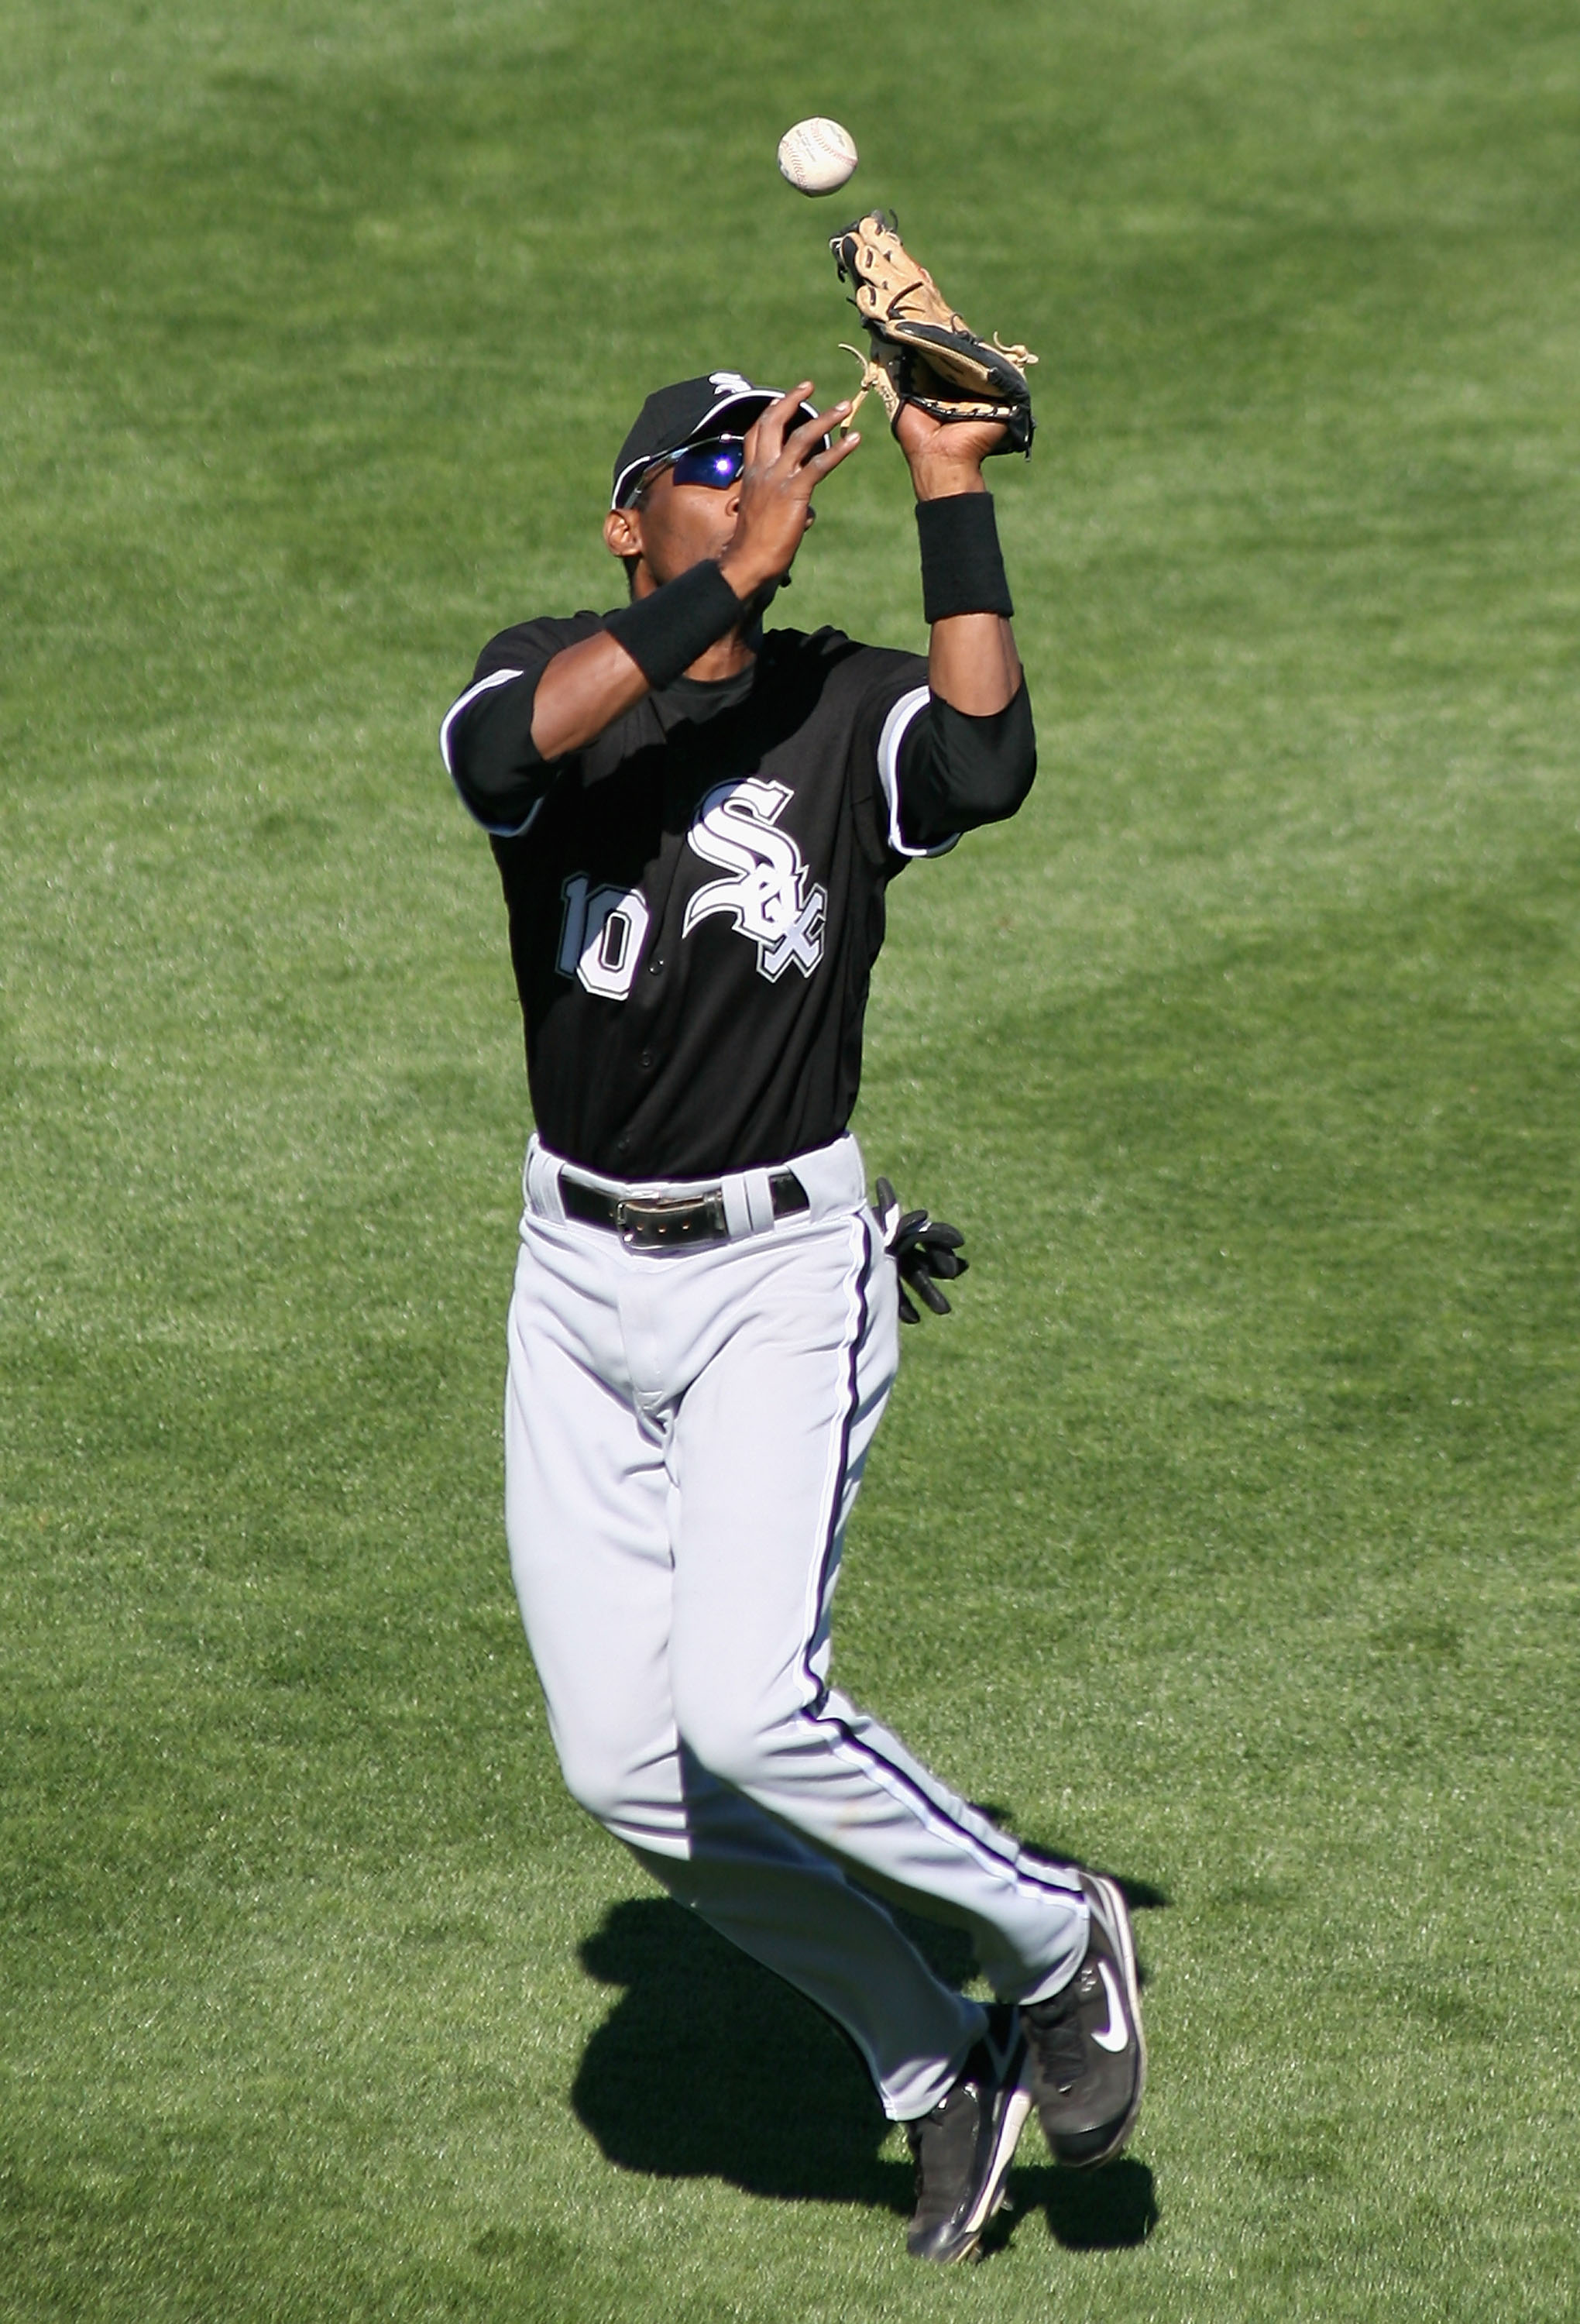 SURPRISE, AZ - MARCH 03:  Outfielder Alexi Ramirez #10 of the Chicago White Sox drops a fly ball for an error during the spring training game against the Kansas City Royals at Surprise Stadium March 3, 2008 in Surprise, Arizona.  (Photo by Christian Peter